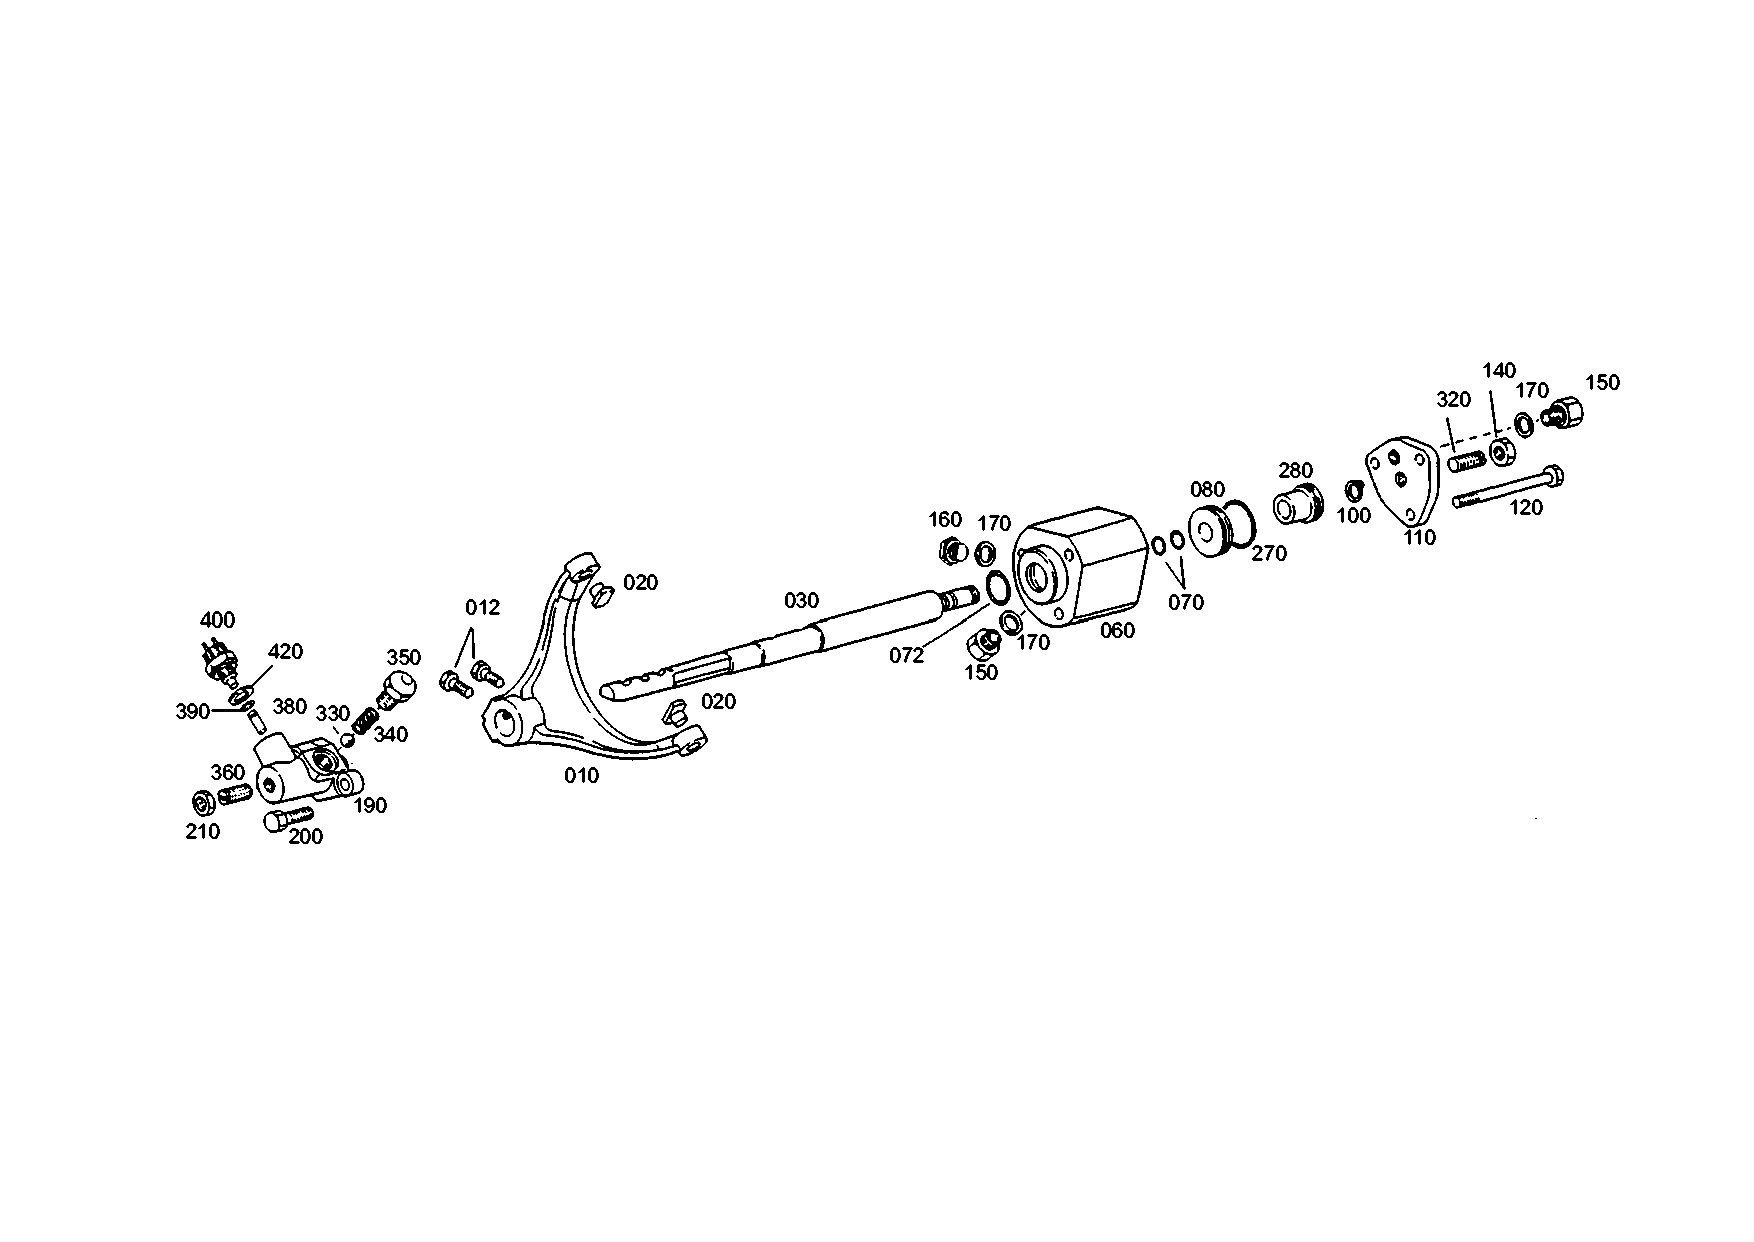 drawing for MARMON Herring MVG202065 - FLANGE (figure 2)